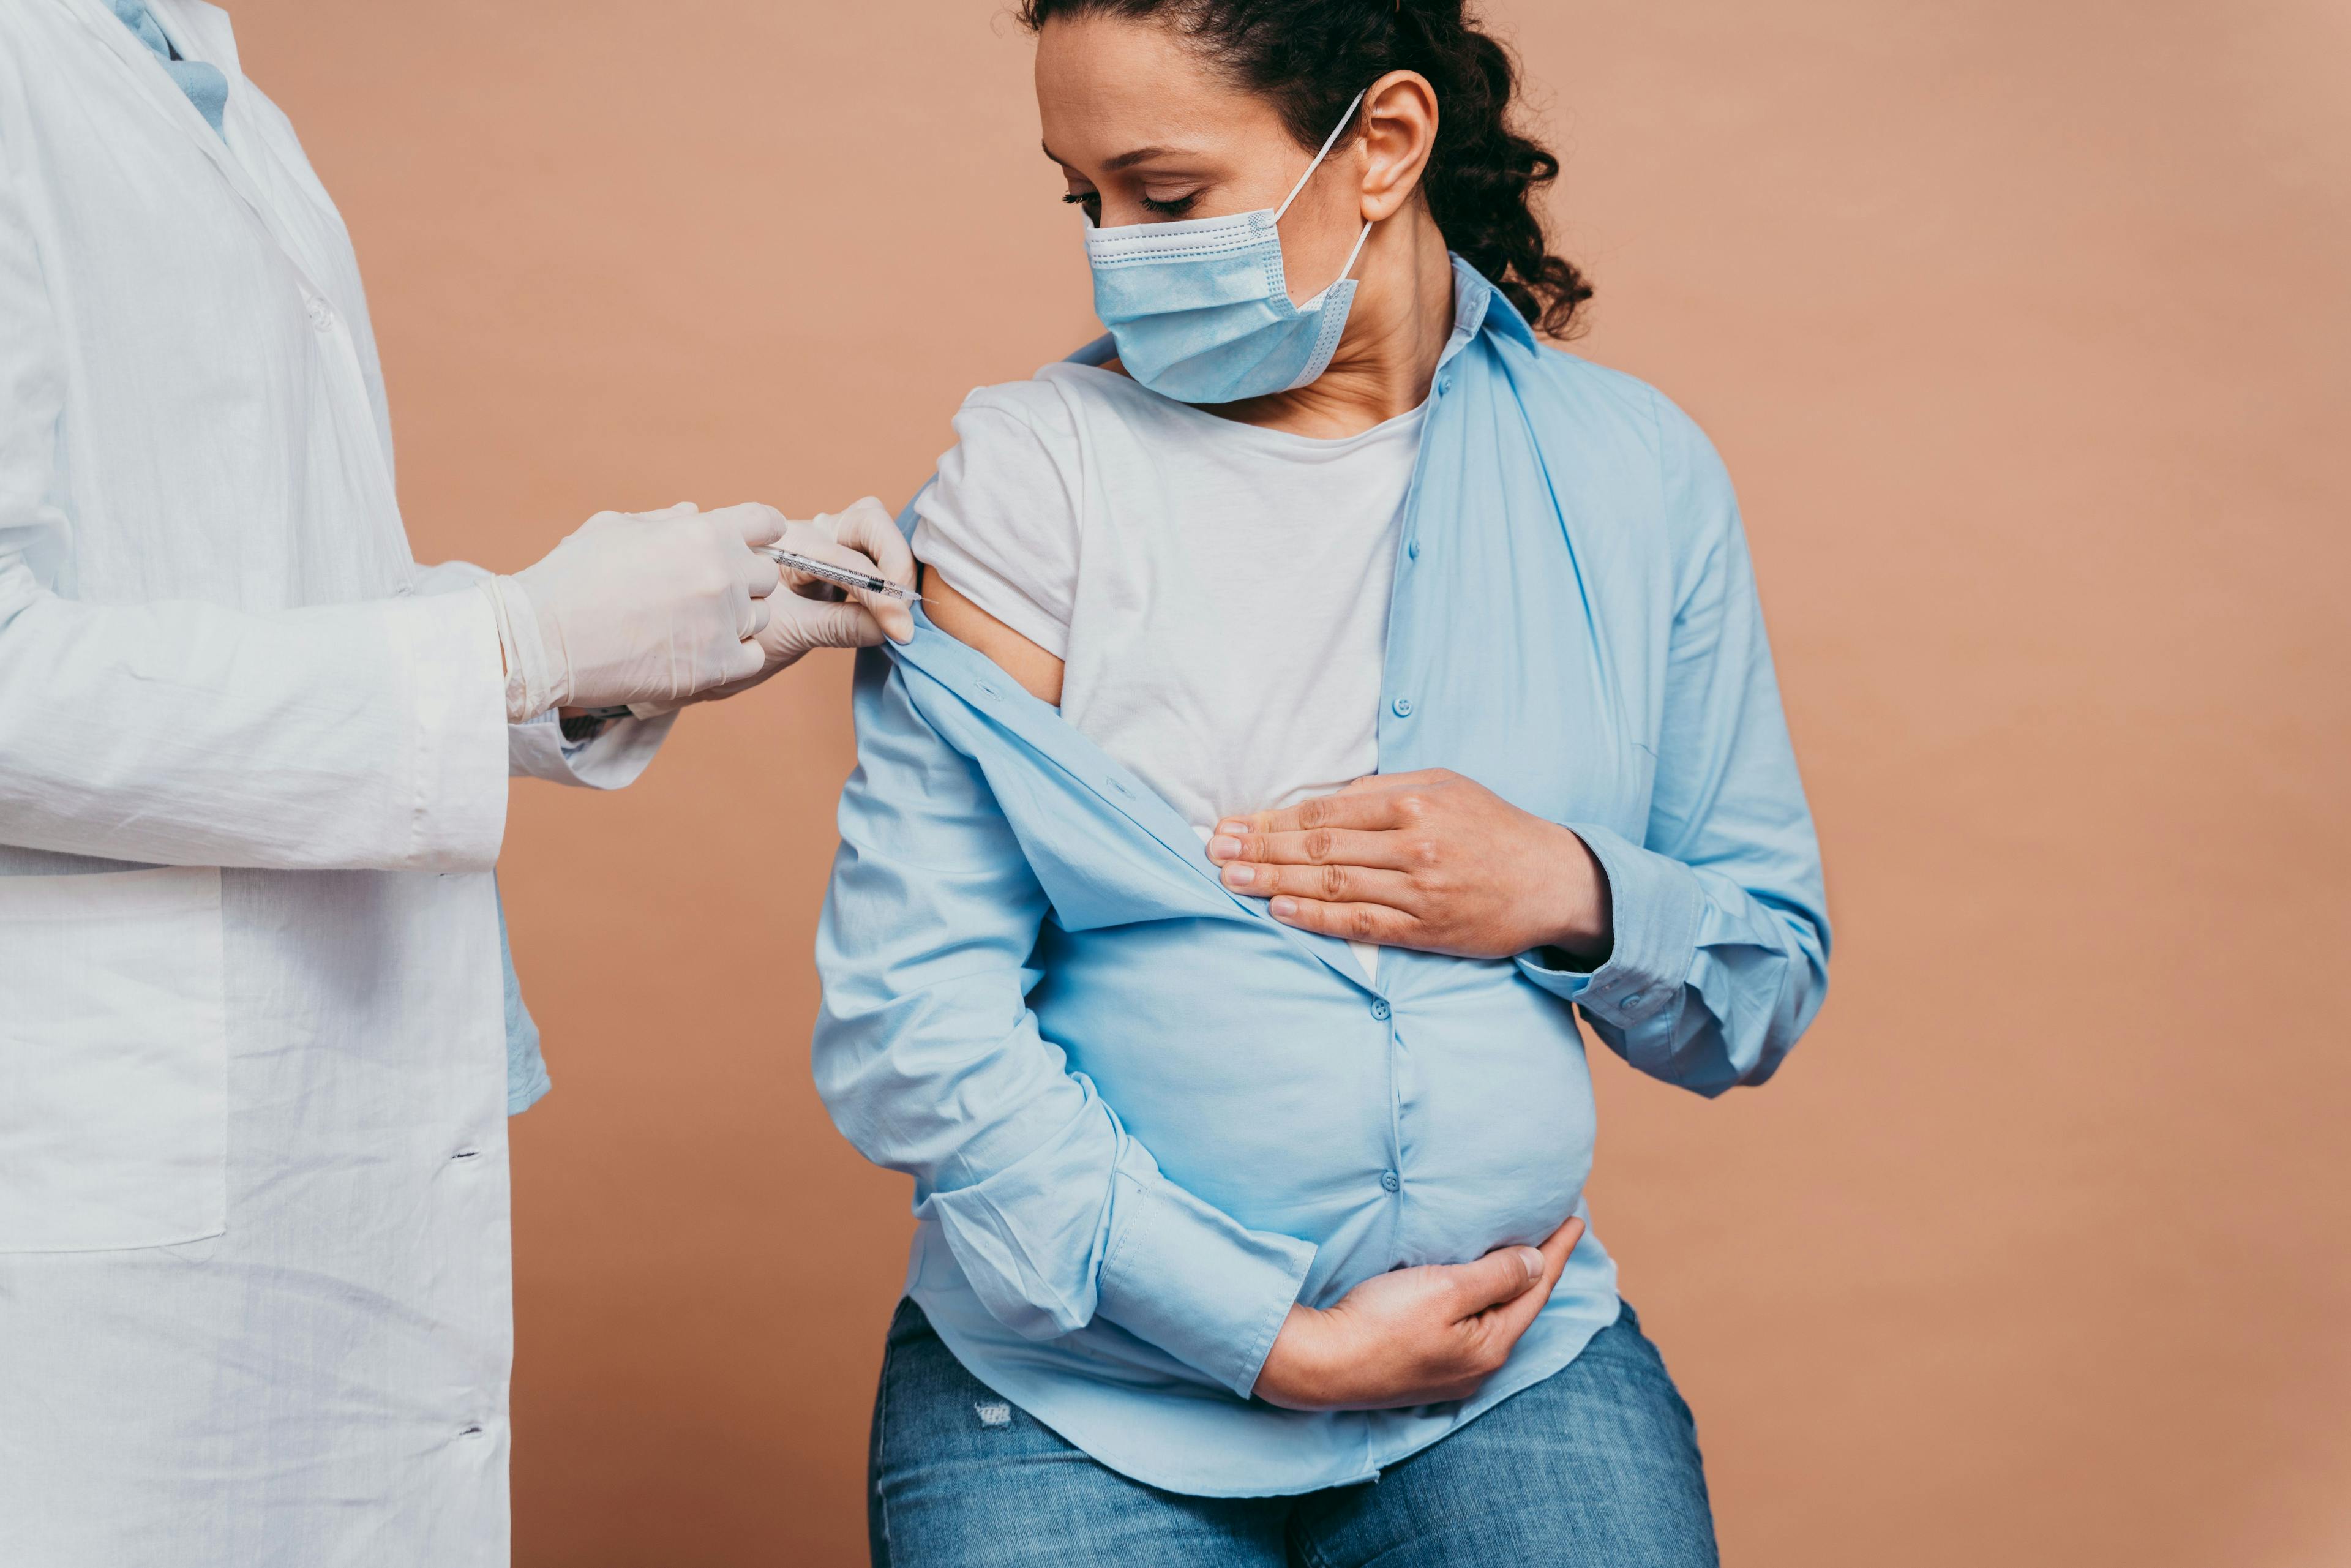 Study: Investigational RSV Vaccine Elicited Neutralizing Antibody Responses in Pregnant Women